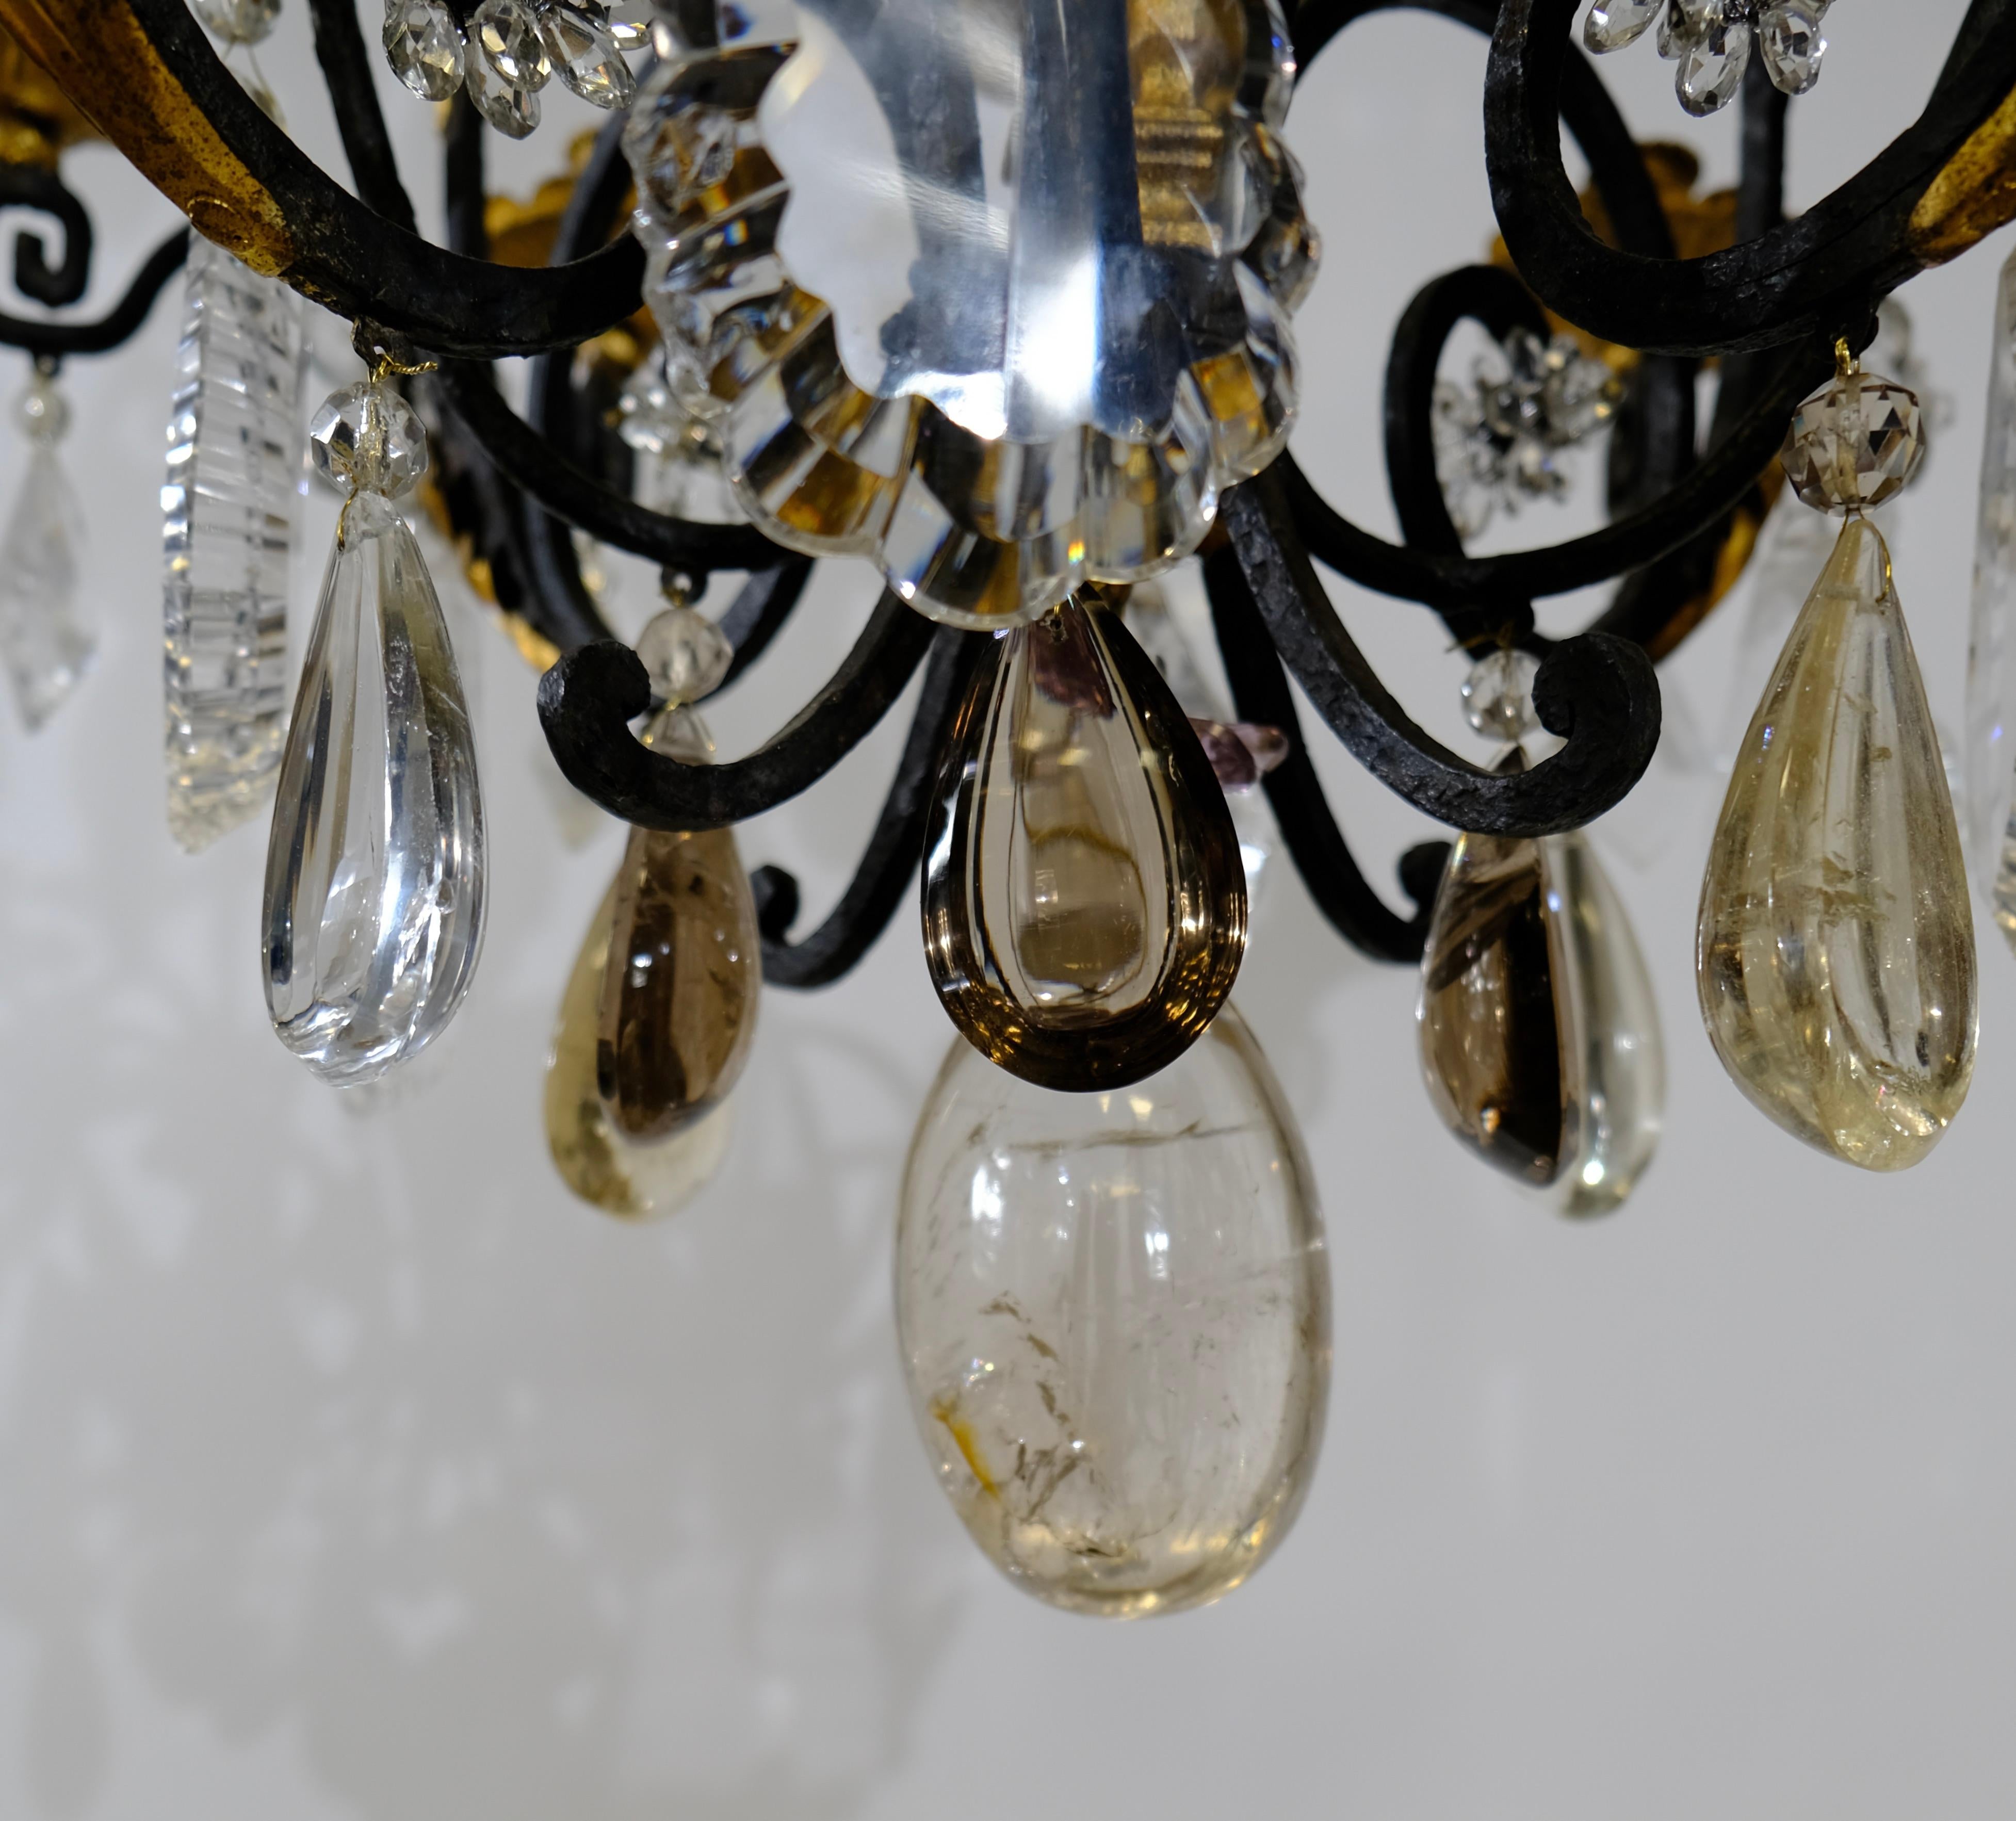 A Baroque style chandelier with 12 candleholders. The frame is forged of iron that is blackened and gilt. The chandelier is pear-shaped and has rockcrystas in the shape of leafs and fruits. Some of the pendants are made of smoky quartz.
The